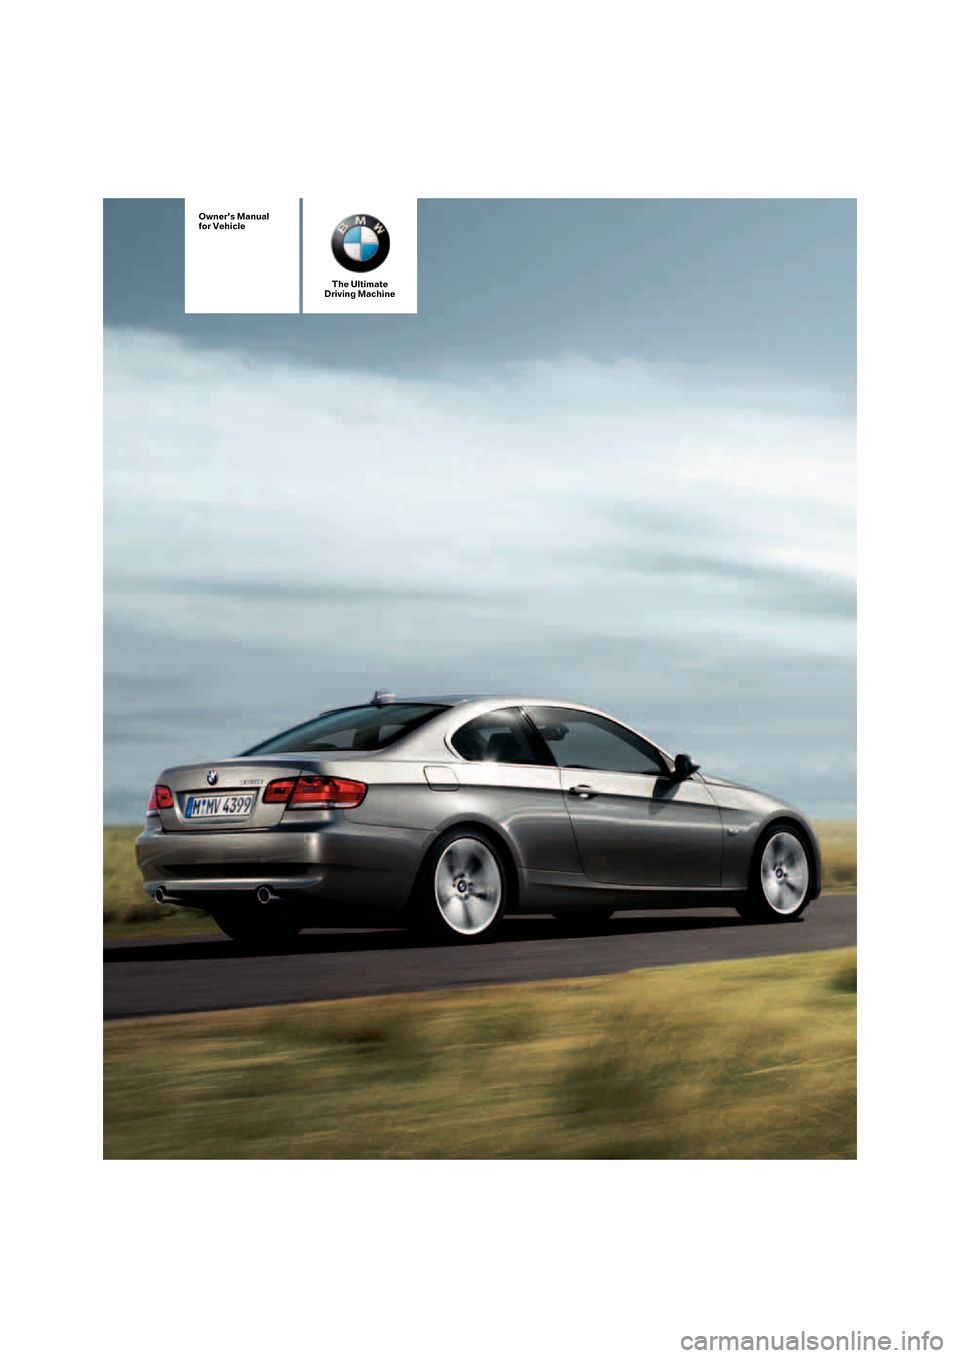 BMW 328I COUPE 2006 E92 Owners Manual The Ultimate
Driving Machine
Owners Manual
for Vehicle
ba8_E9293_US.book  Seite 1  Freitag, 5. Mai 2006  1:02 13 